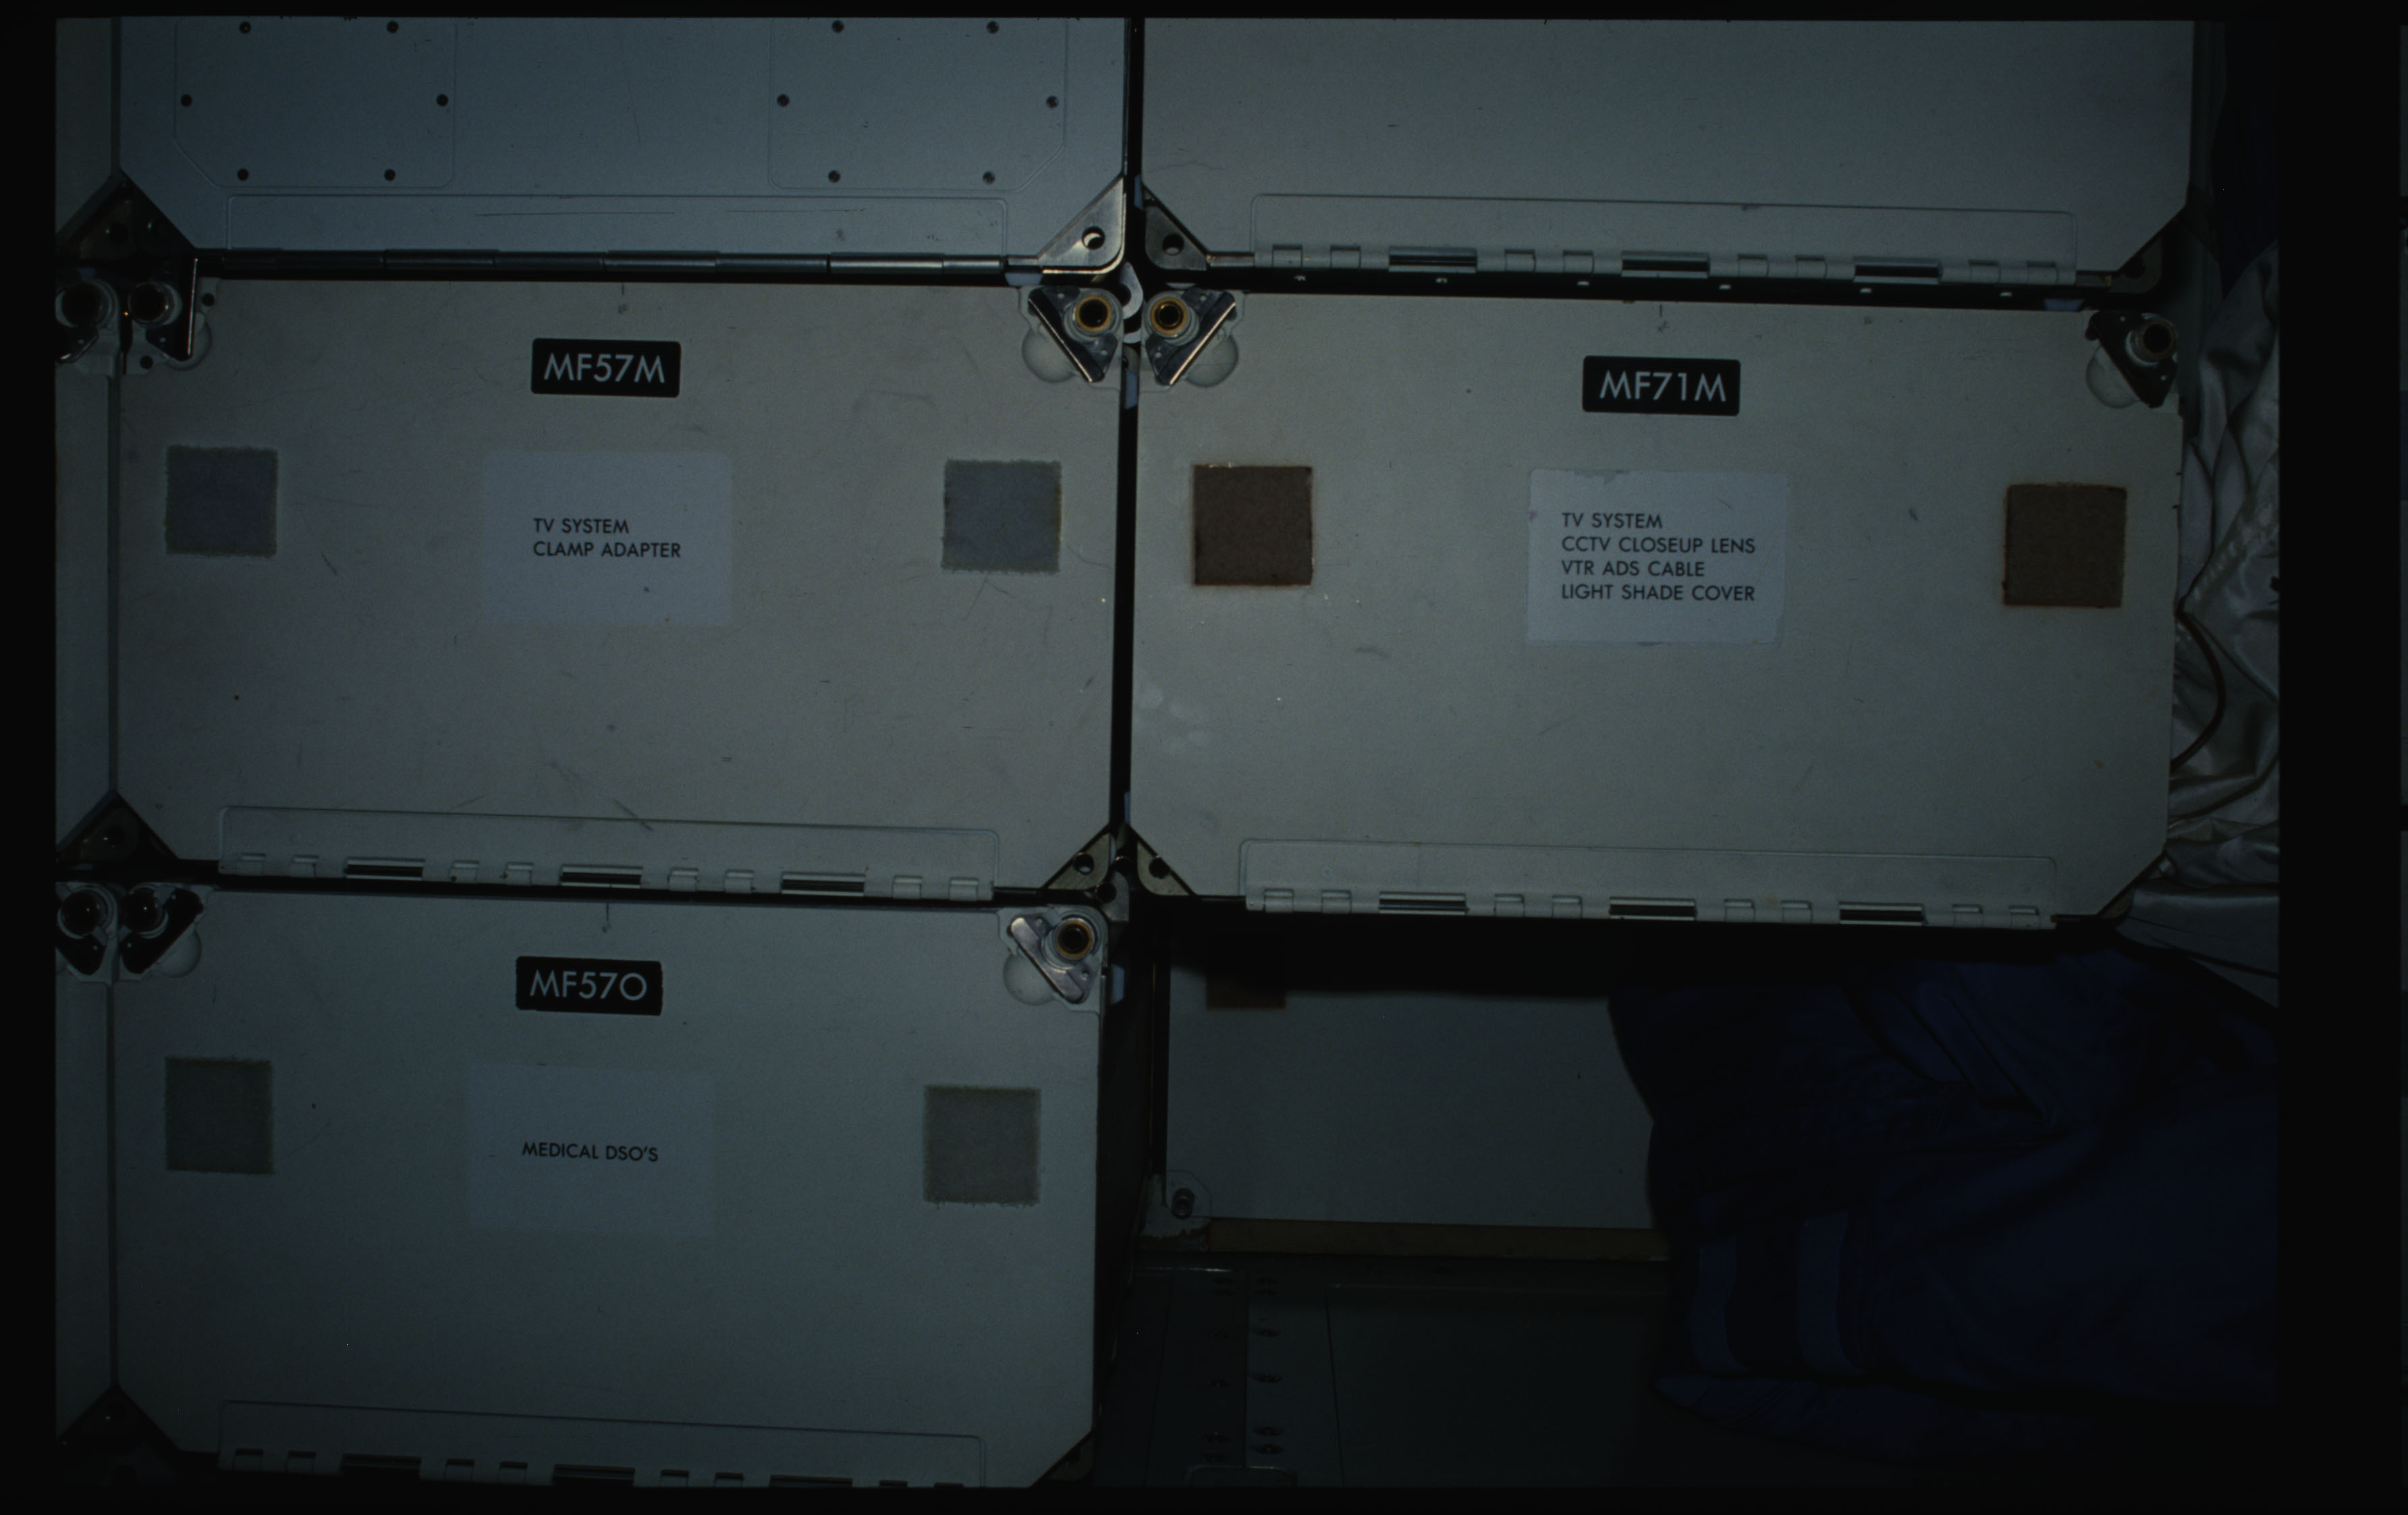 41C-08-293 - STS-41C - Middeck lockers on the space shuttle Challenger